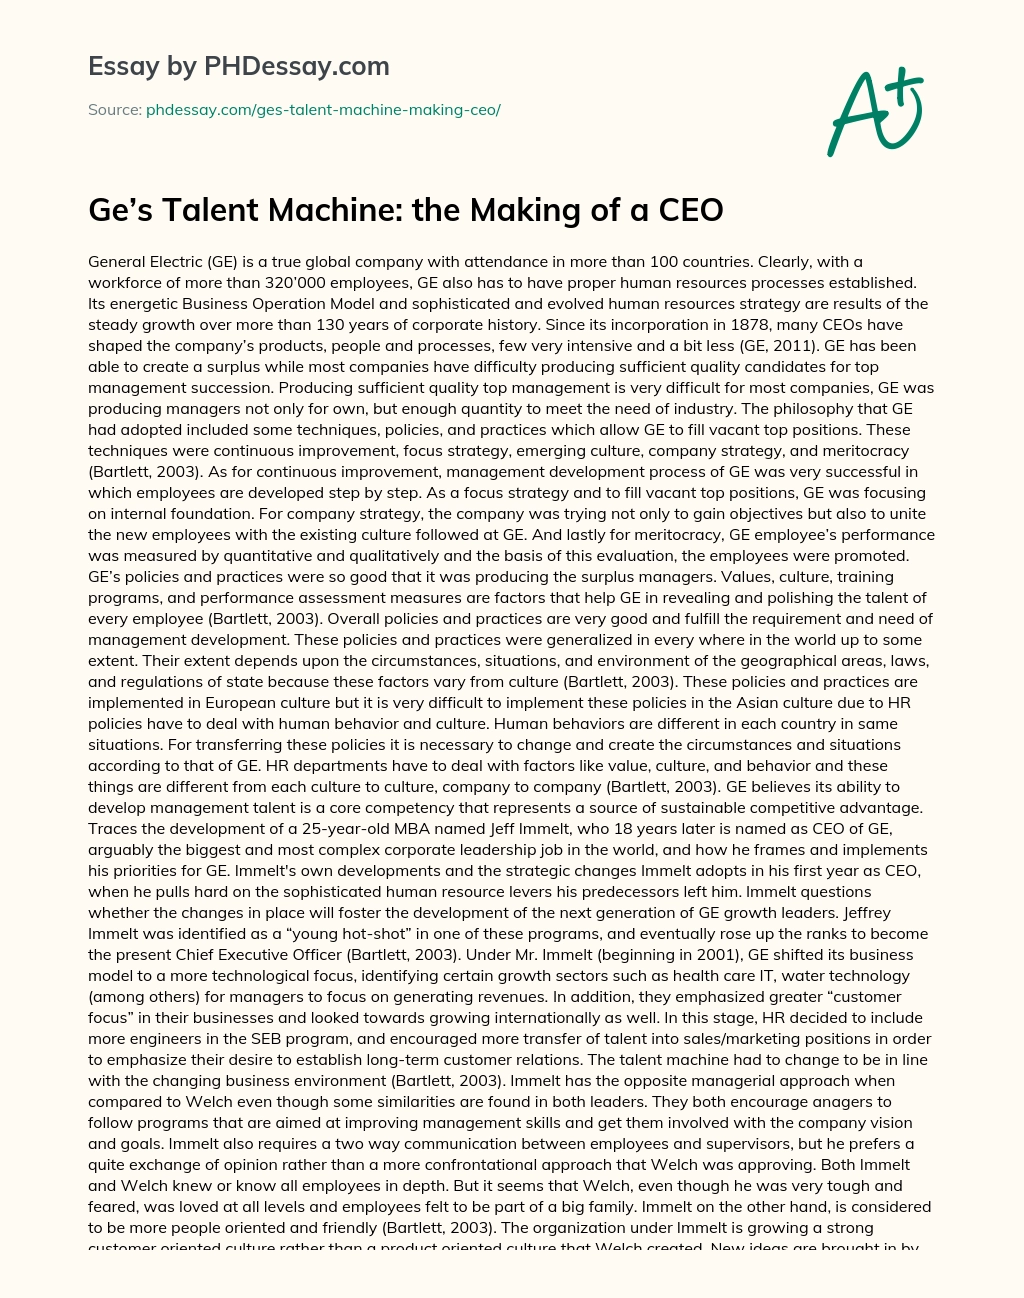 Ge’s Talent Machine: the Making of a CEO essay